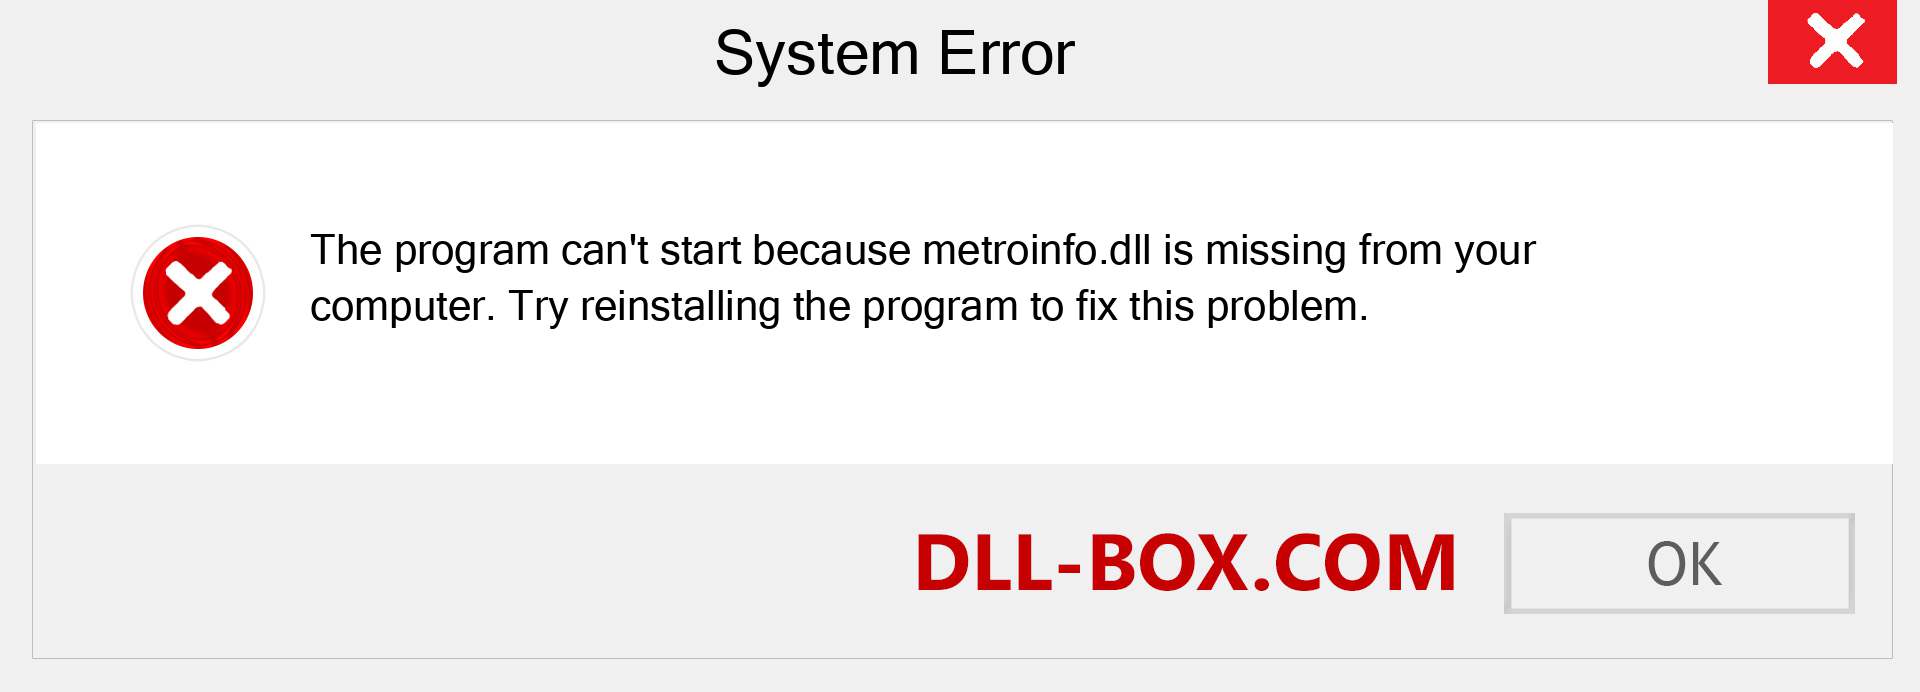  metroinfo.dll file is missing?. Download for Windows 7, 8, 10 - Fix  metroinfo dll Missing Error on Windows, photos, images